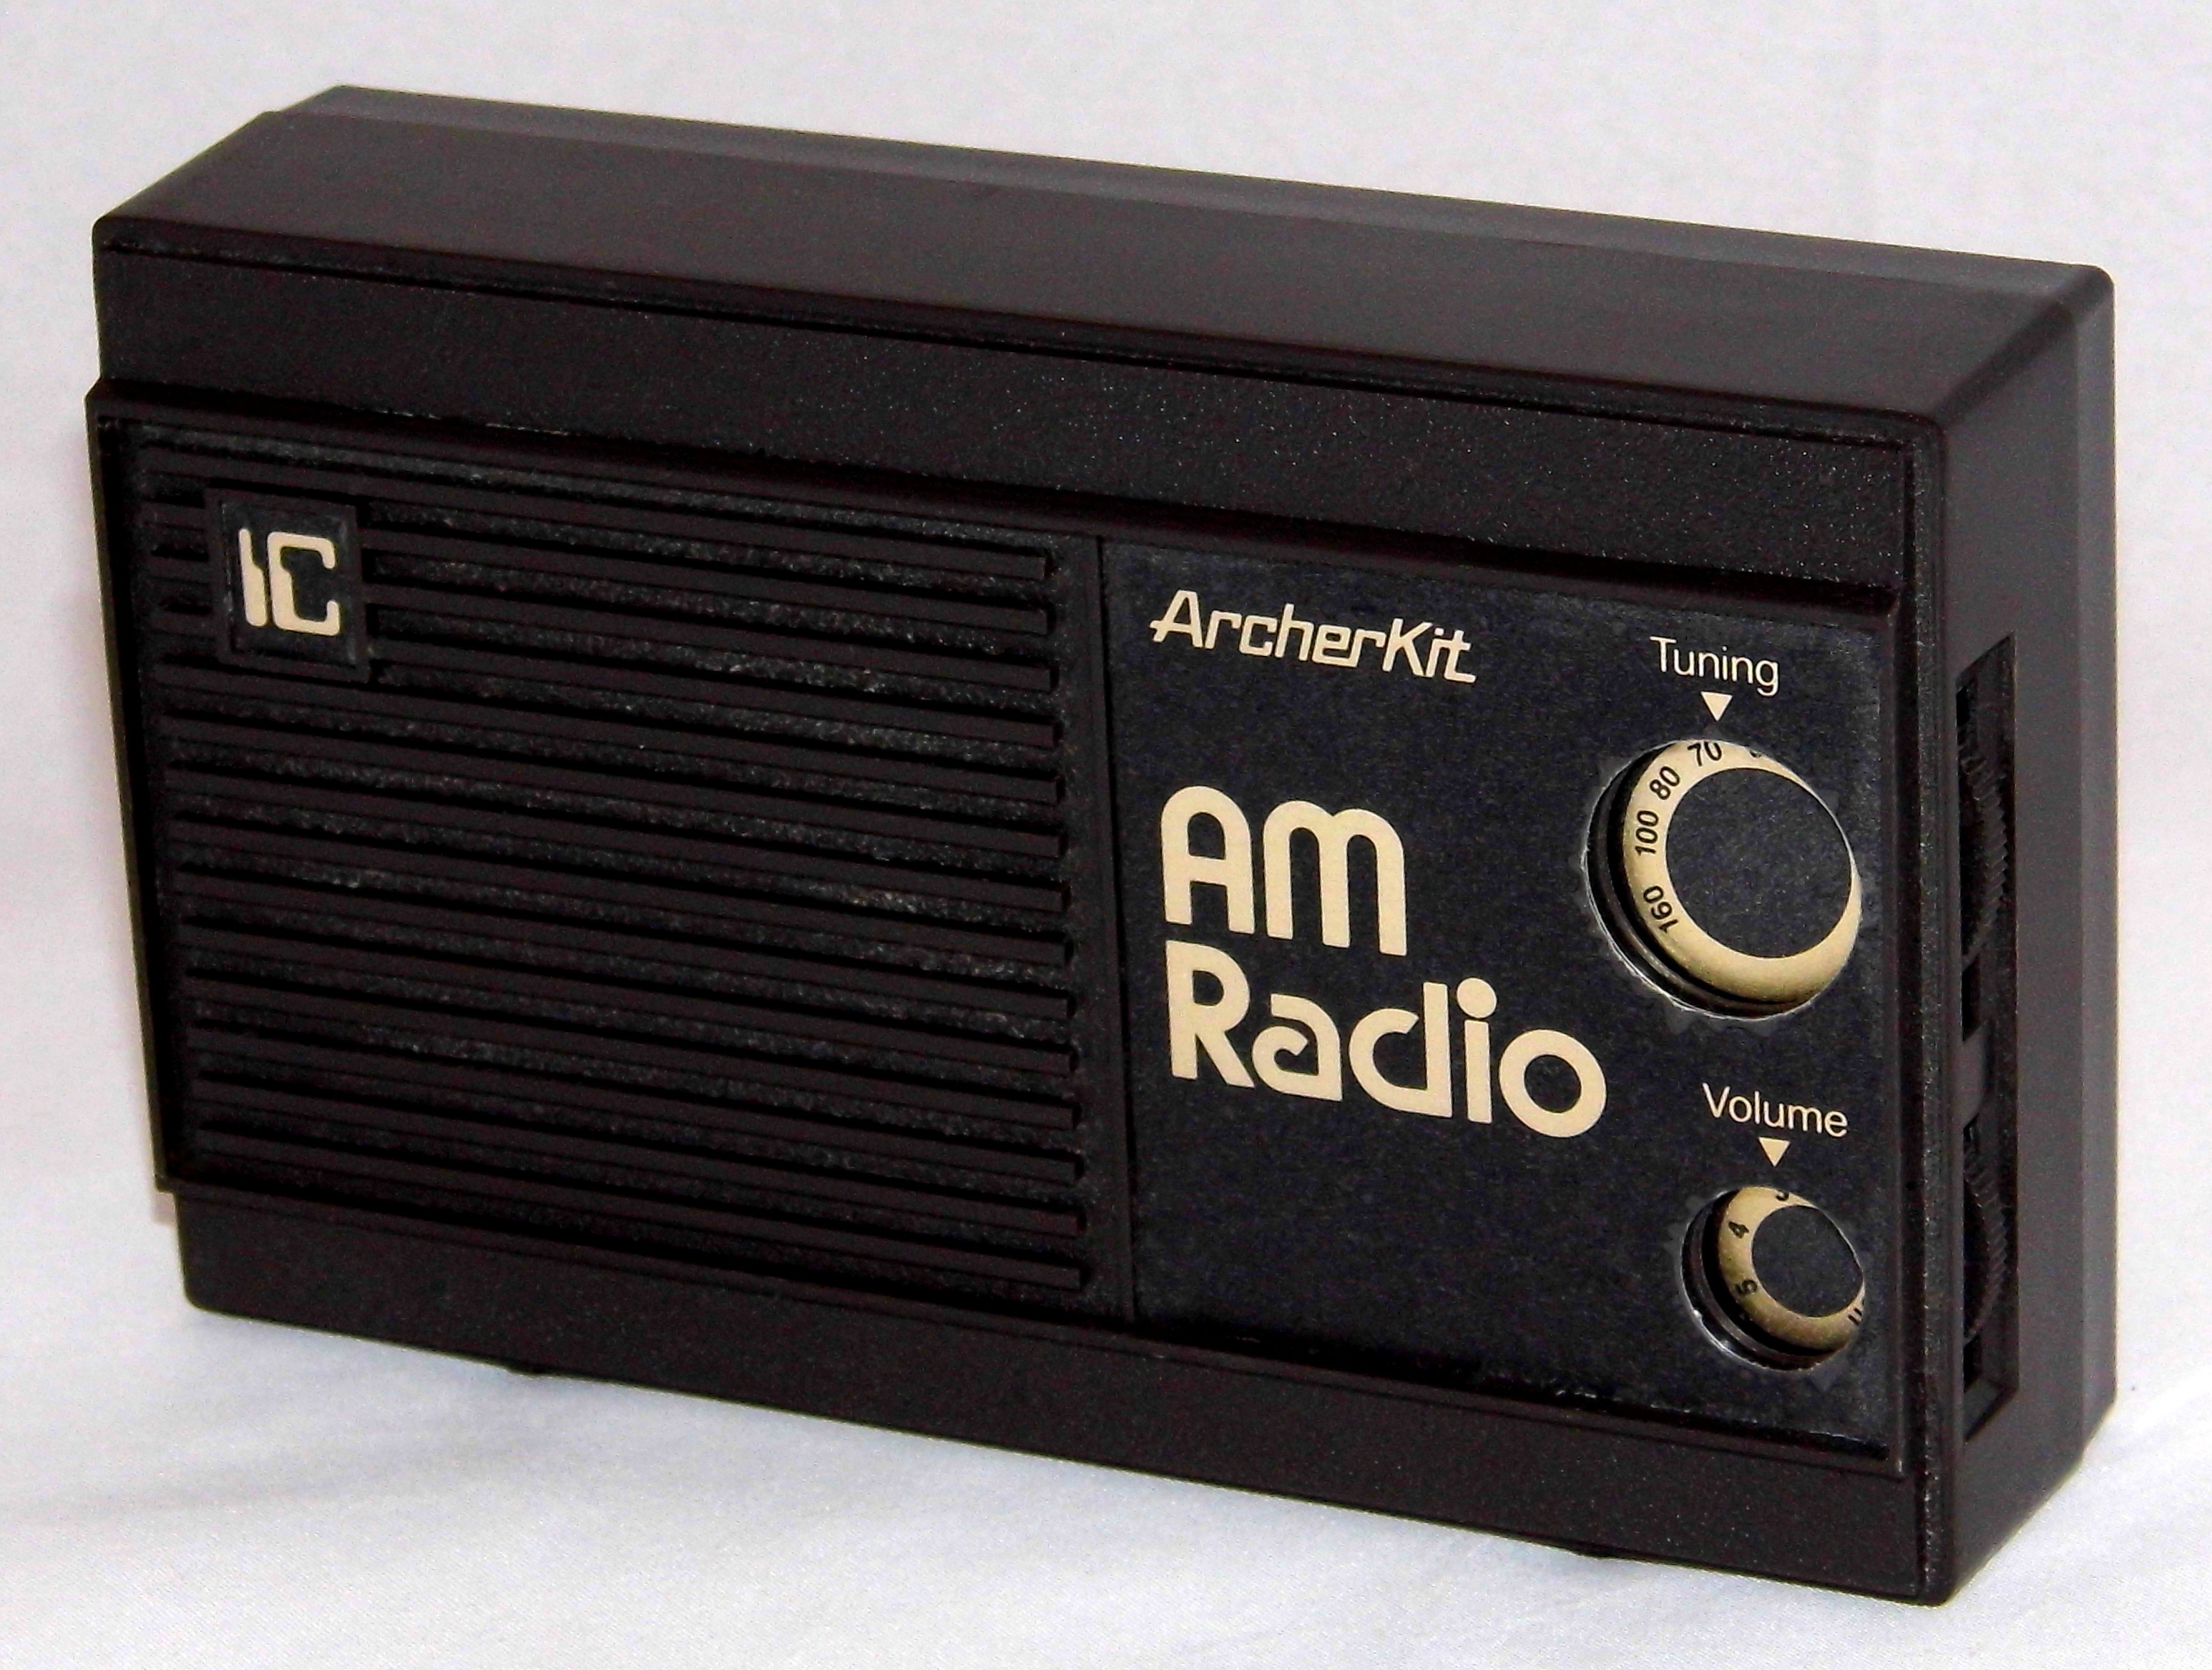 File:Vintage ArcherKit 2-Transistor, 1 IC AM Radio Kit, Fully Assembled,  Catalog No. 28-4029, Sold By Radio Shack, Made In Taiwan, Circa 1970s  (38445410701).jpg - Wikimedia Commons